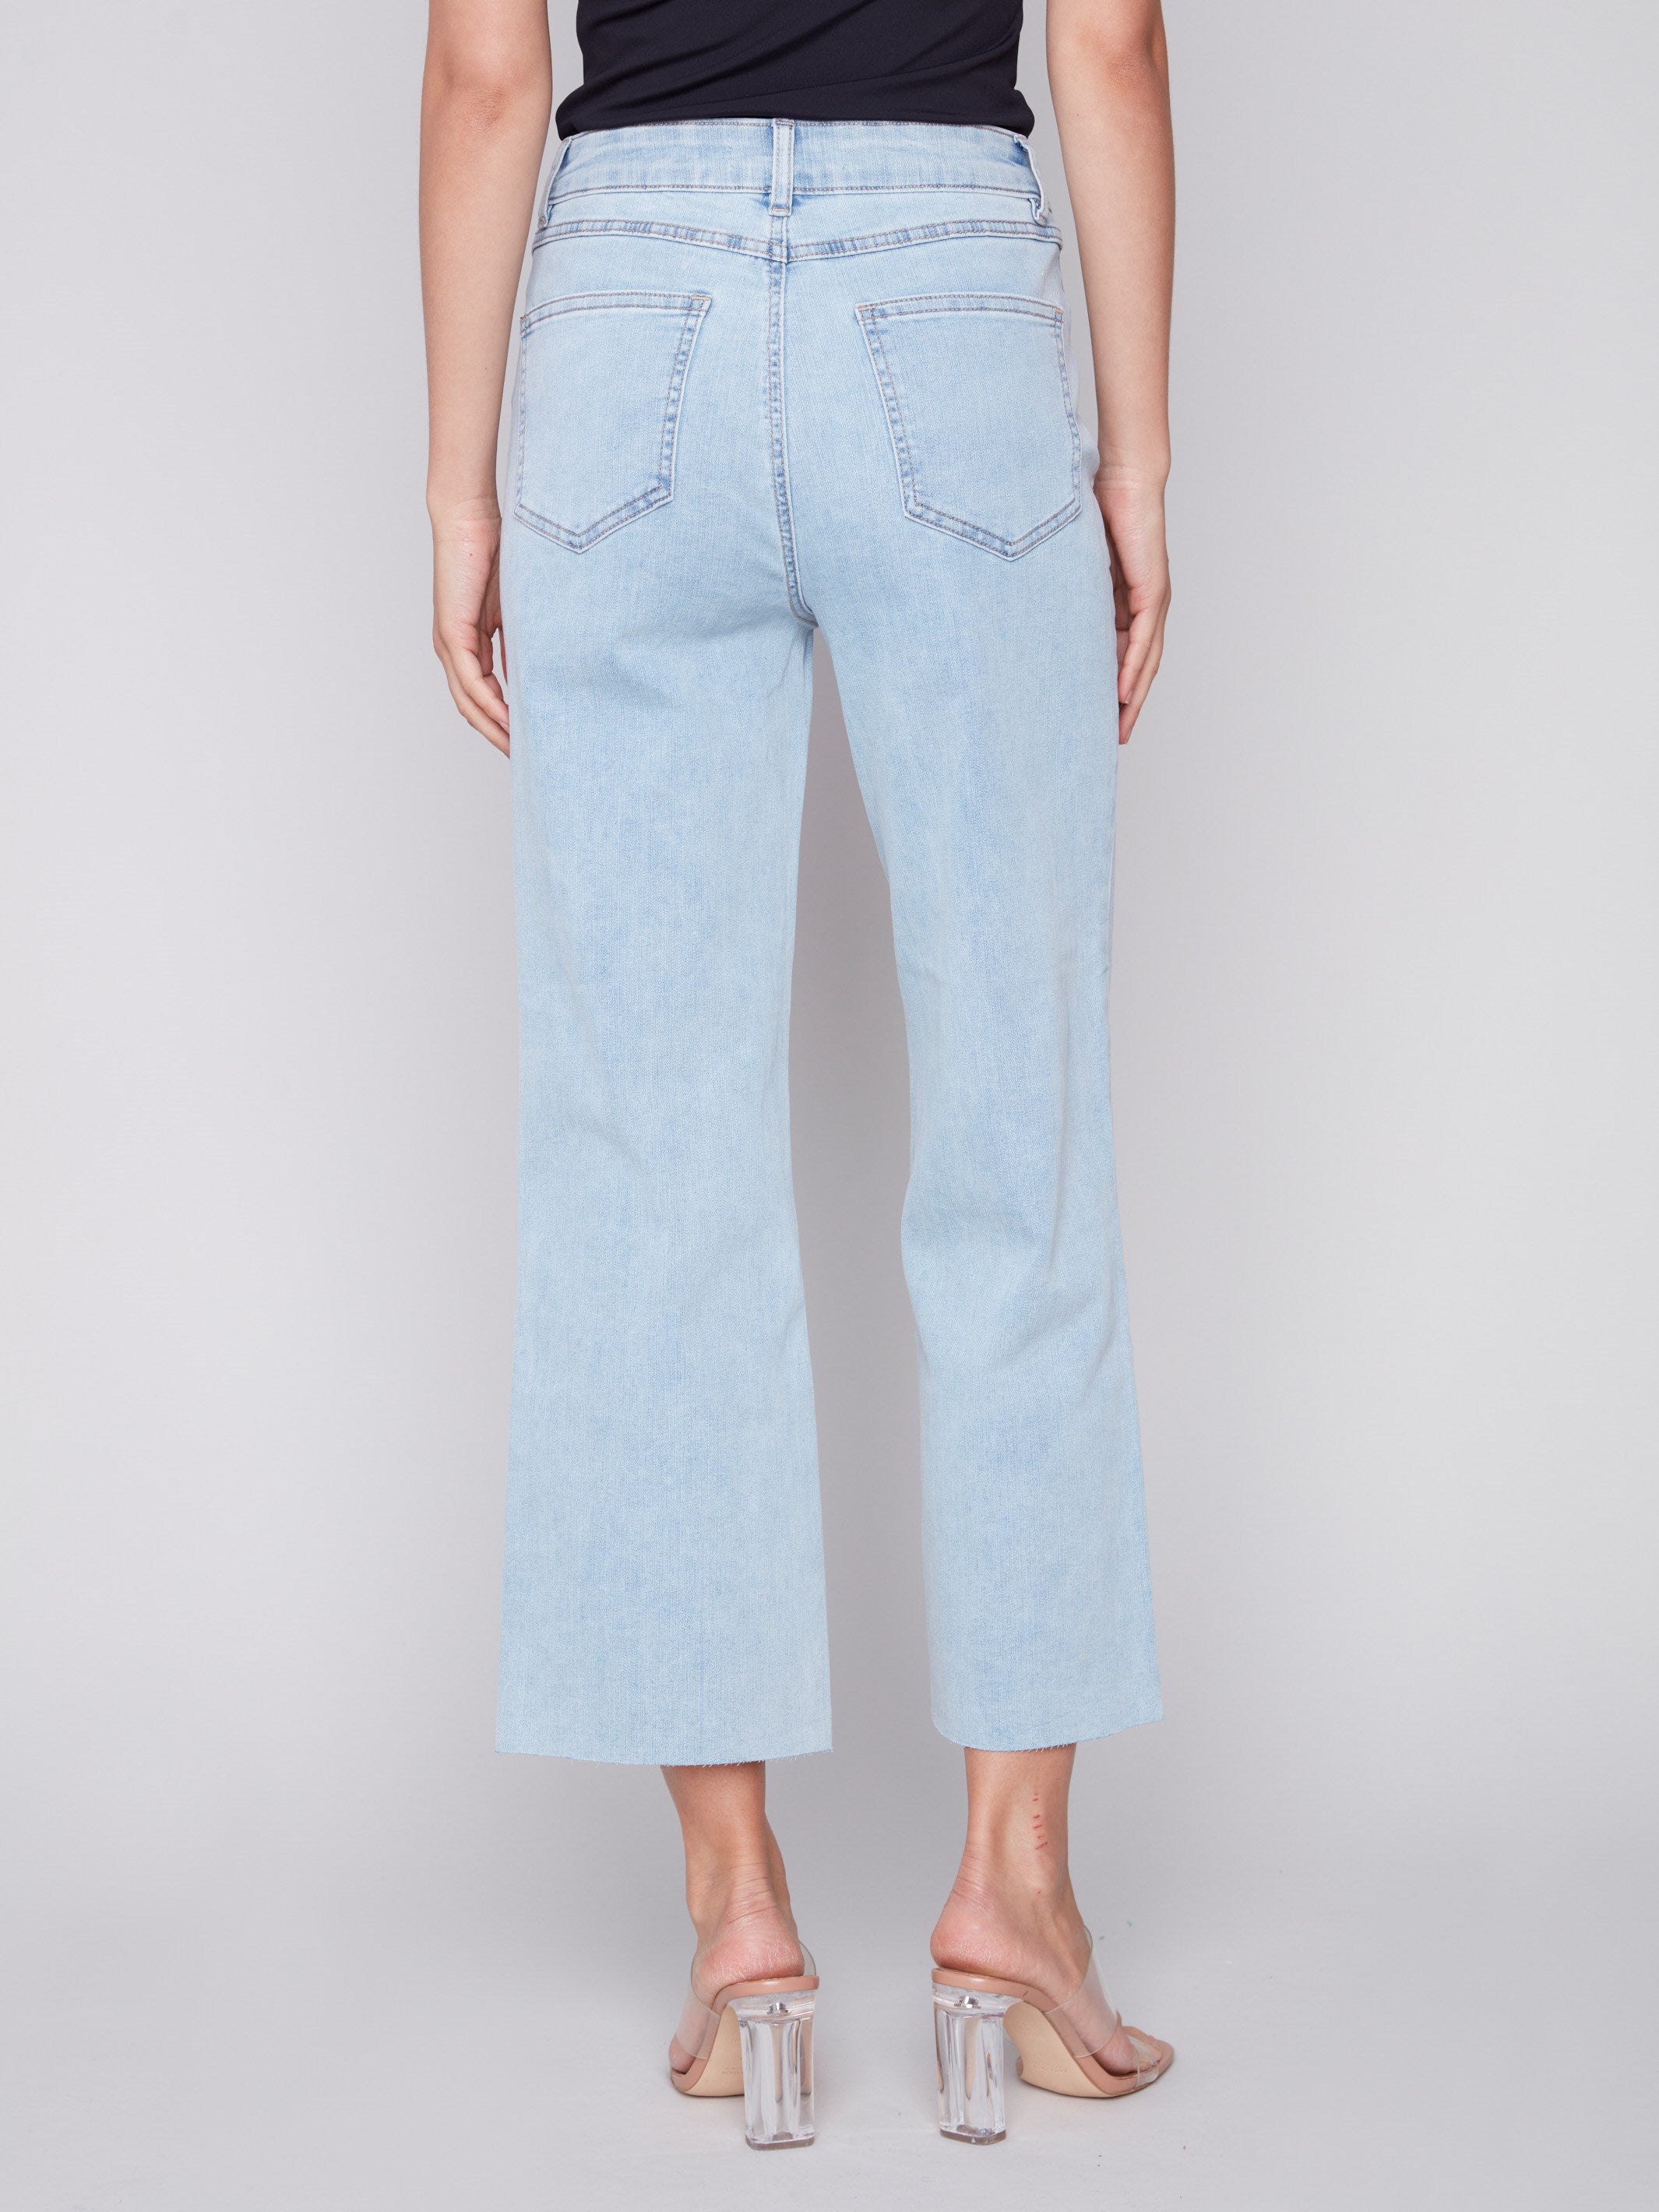 Flared Jeans with Raw Edge - Bleach Blue - Charlie B Collection Canada - Image 3